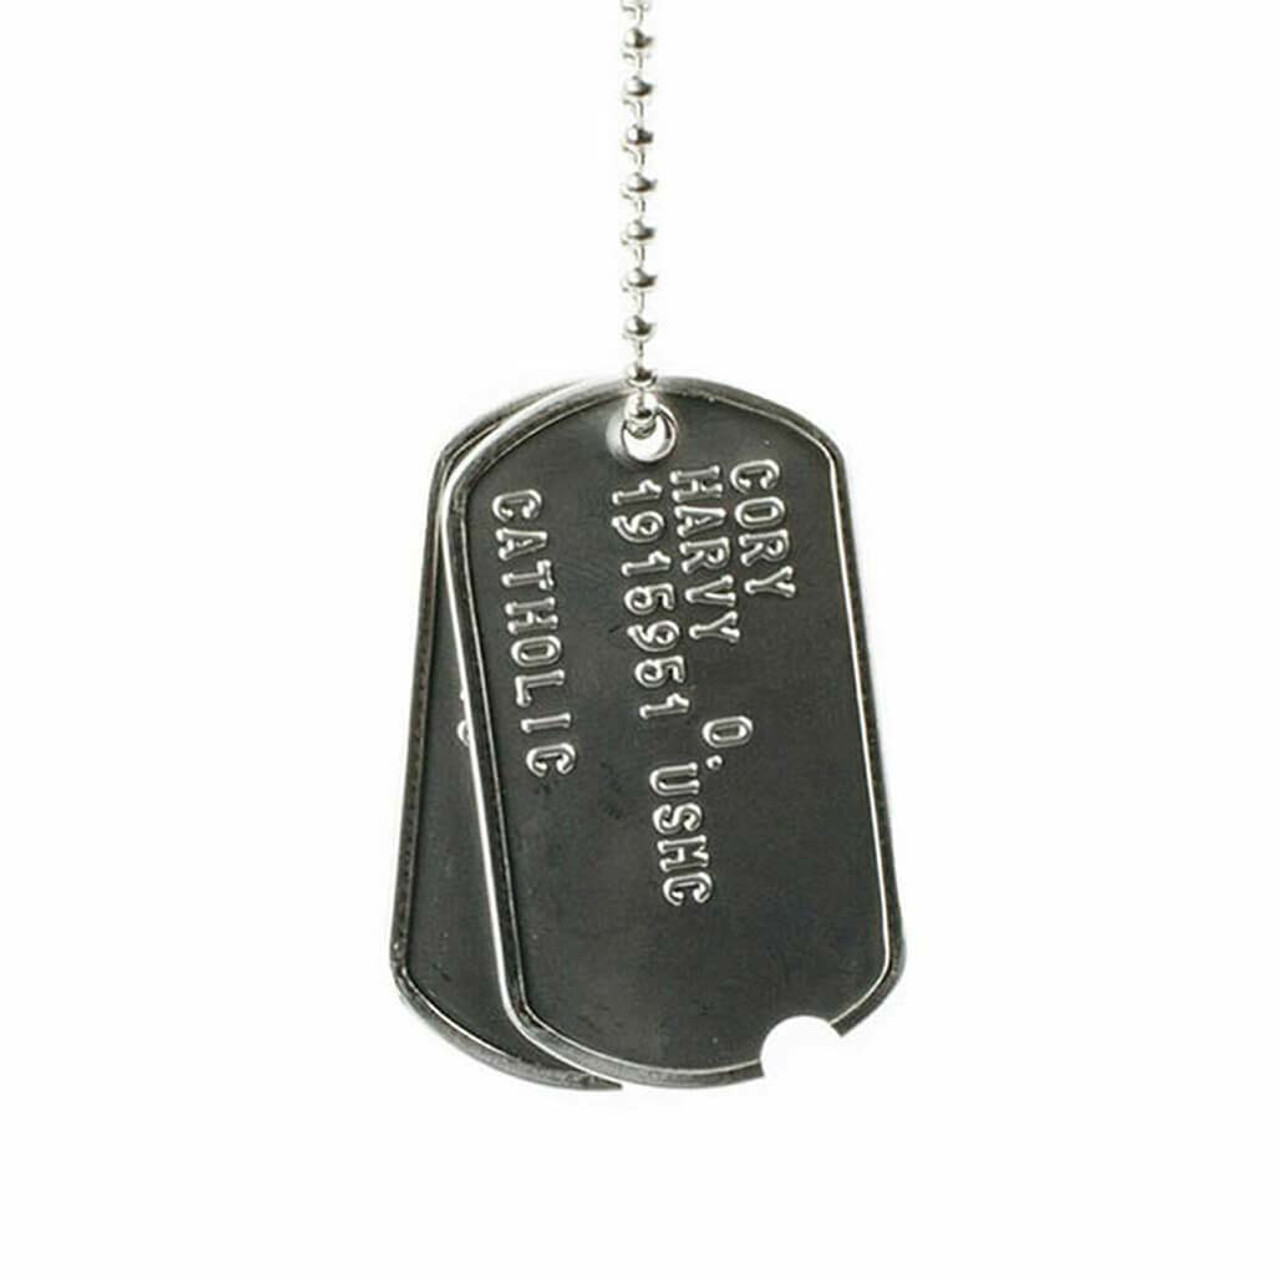 Army ID Dog Tags Tactical Style Military Chain Necklace Tag Men's Titanium  Dog J9I6 - Walmart.com